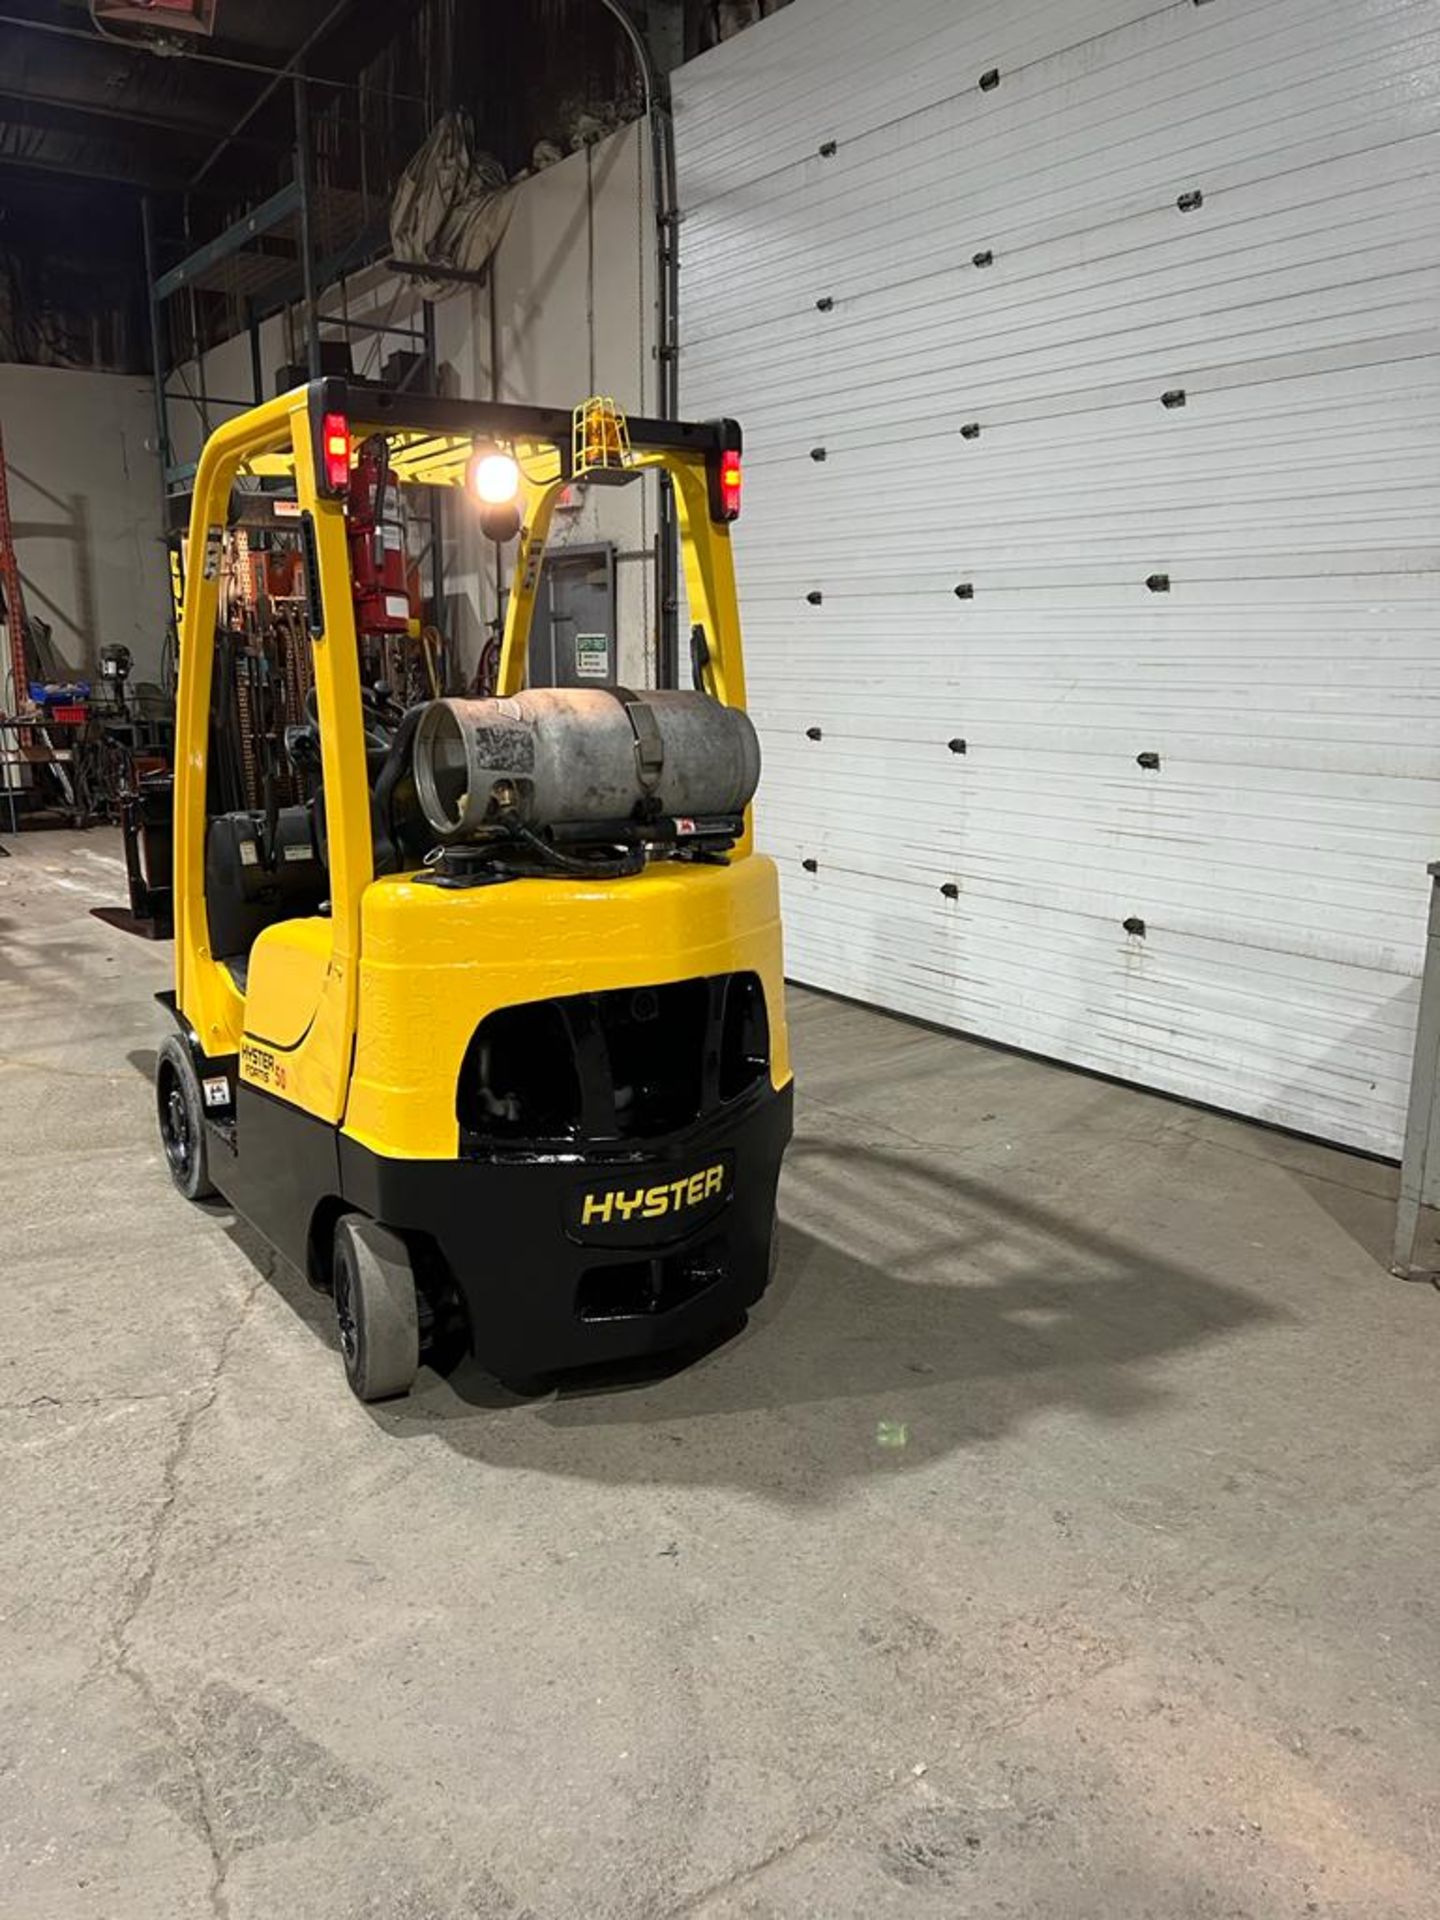 NICE 2015 Hyster model 50 - 5,000lbs Capacity Forklift LPG (Propane) with Sideshift - 3-stage - Image 2 of 4